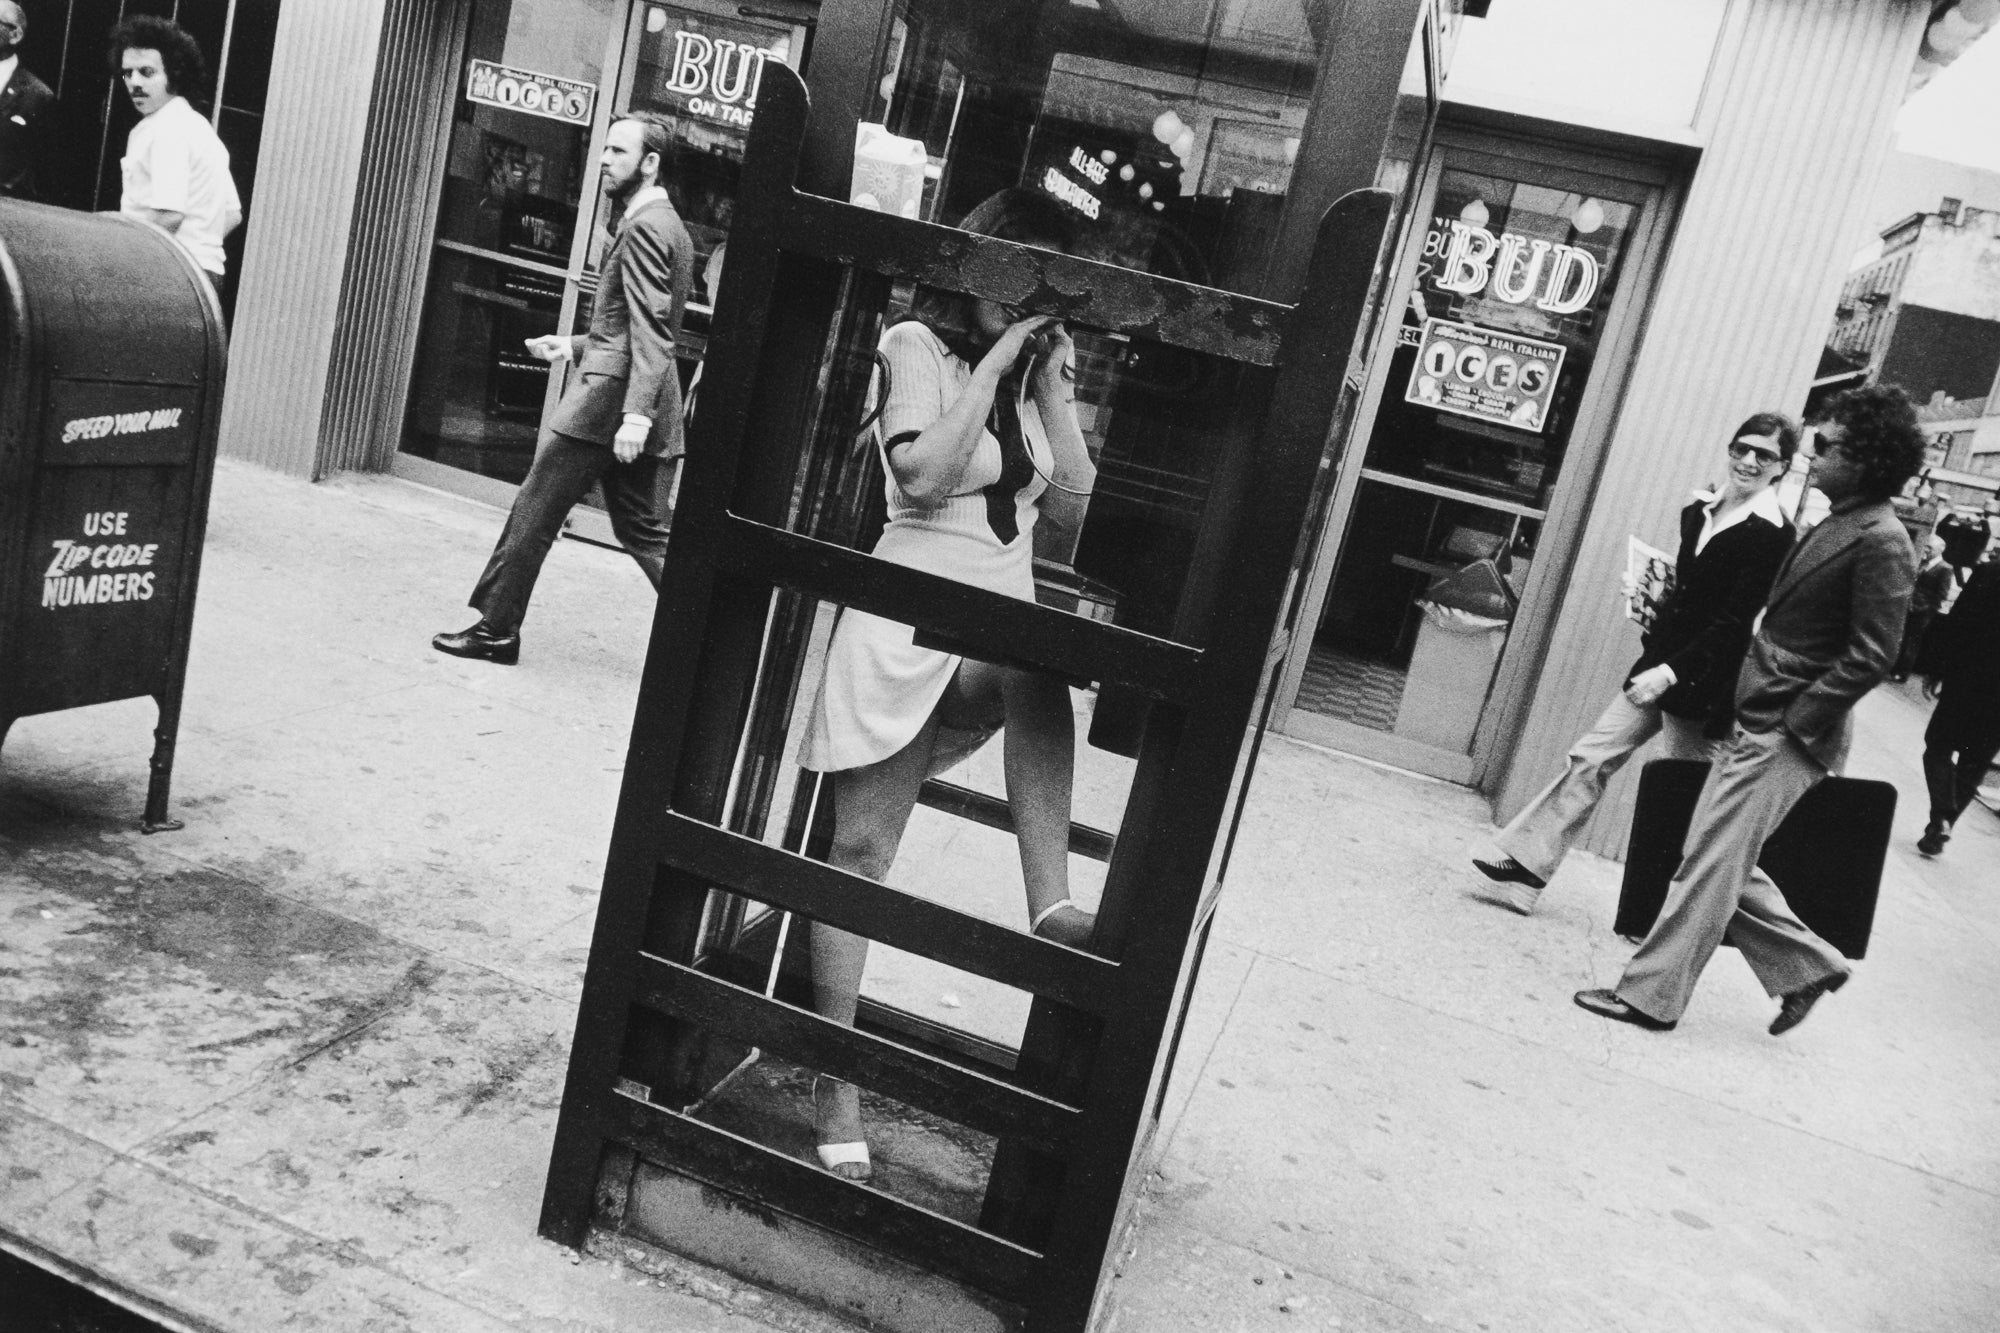 Garry Winogrand — The Game of Photography